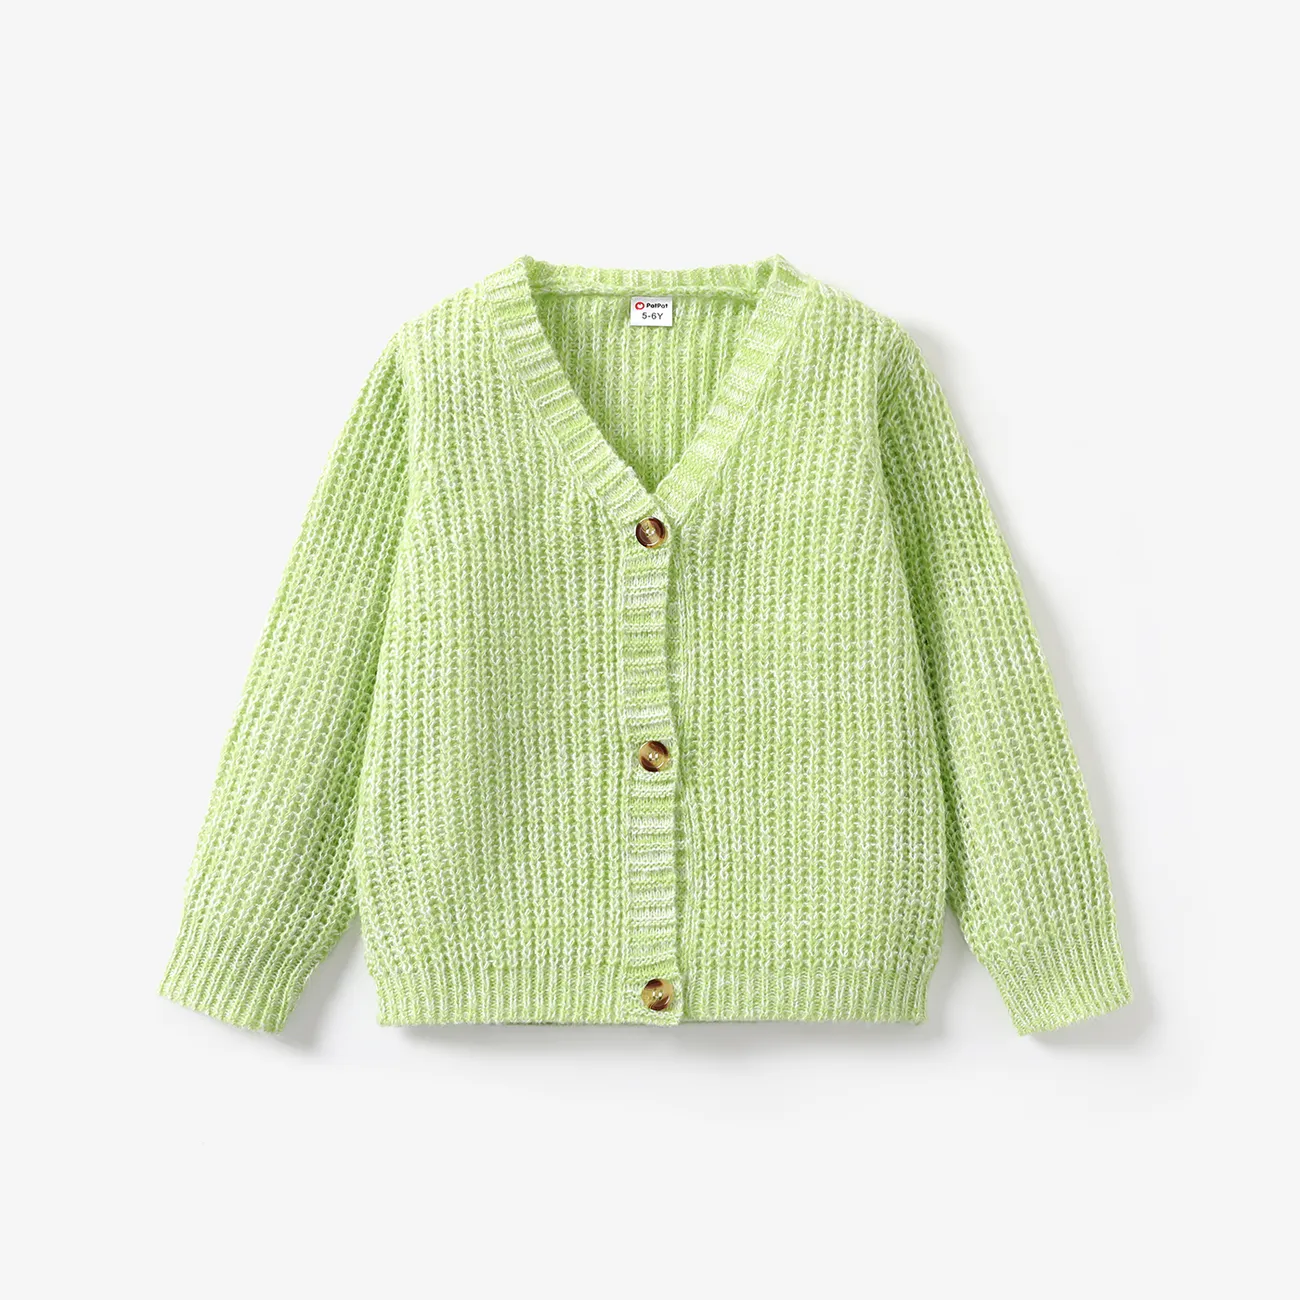 Baby Knit Cardigans Button Sweater Coat Pale Green big image 1